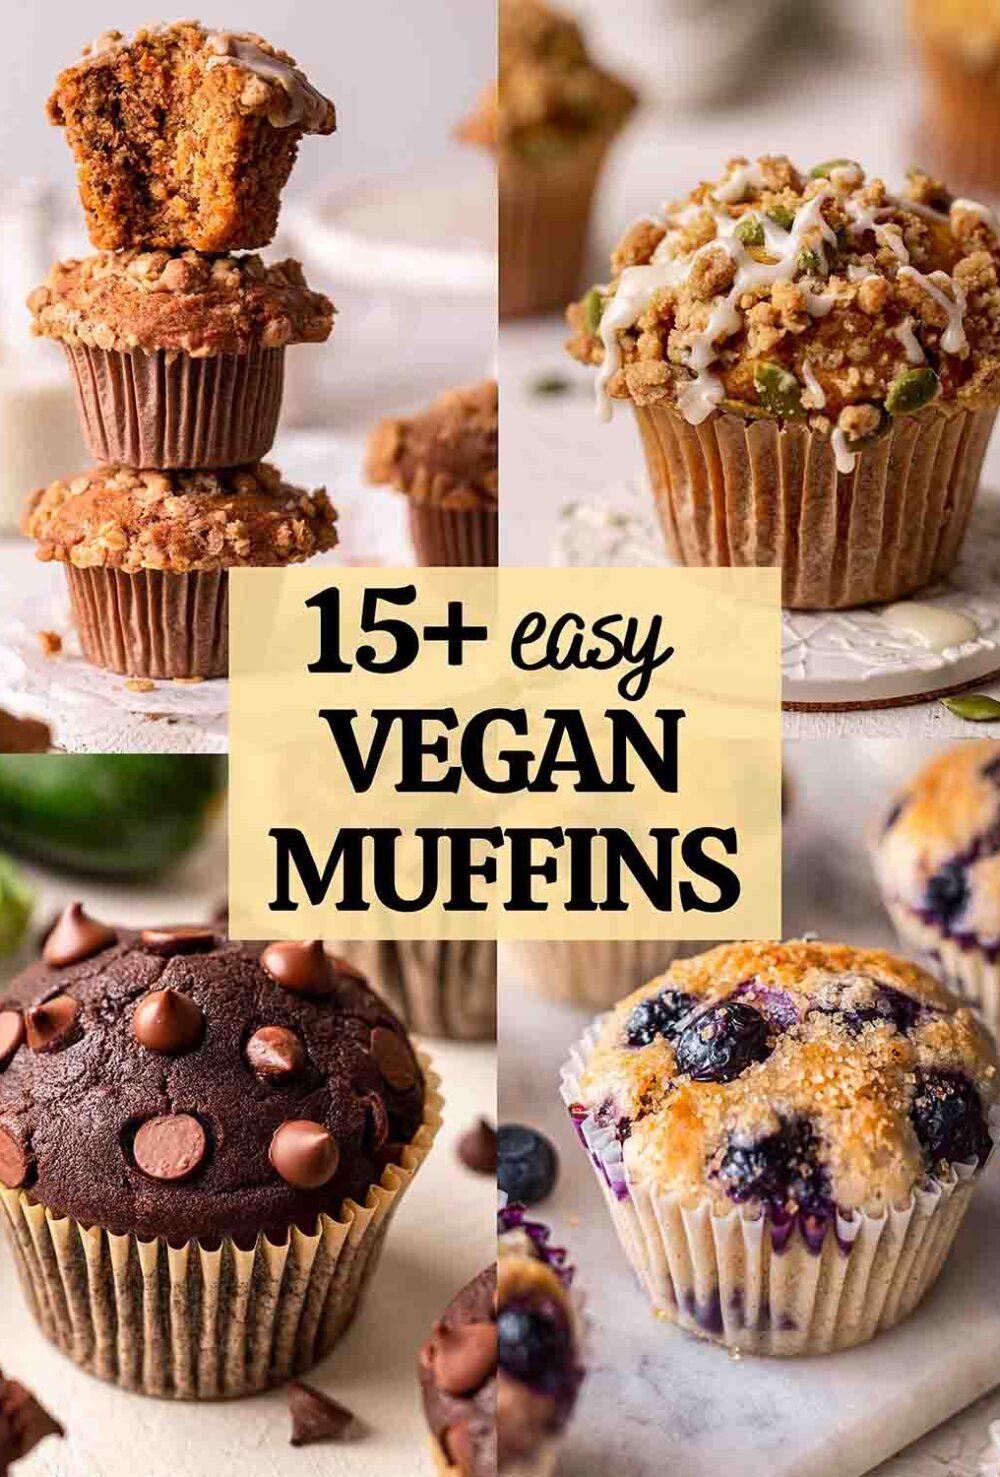 Collage of four vegan muffins with text overlay that says '15+ easy vegan muffins'.